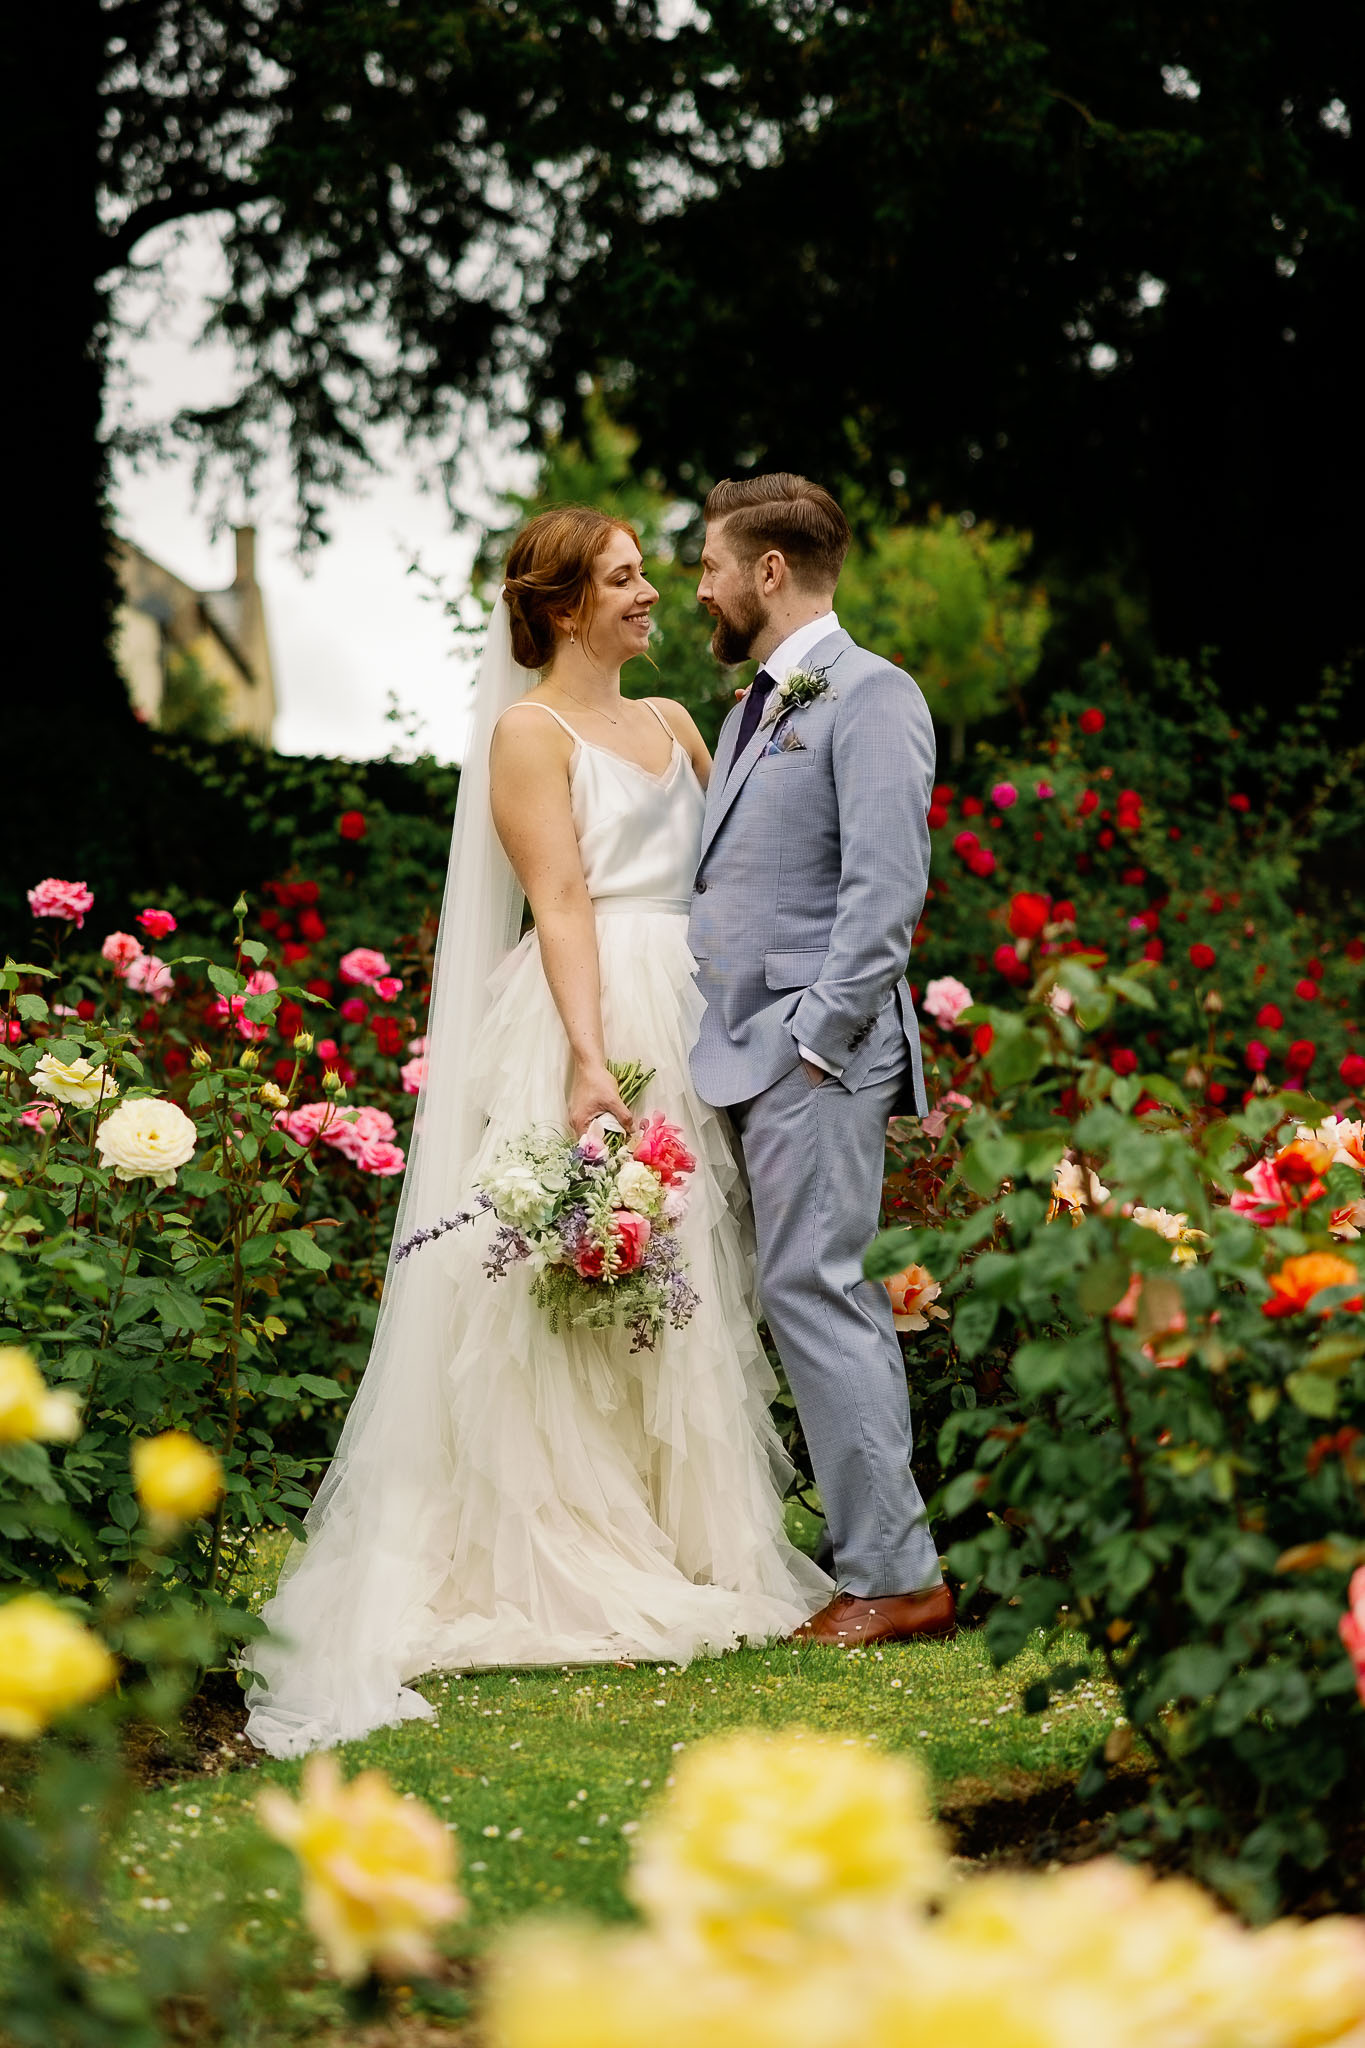 Colourful Wedding Photography in Somerset